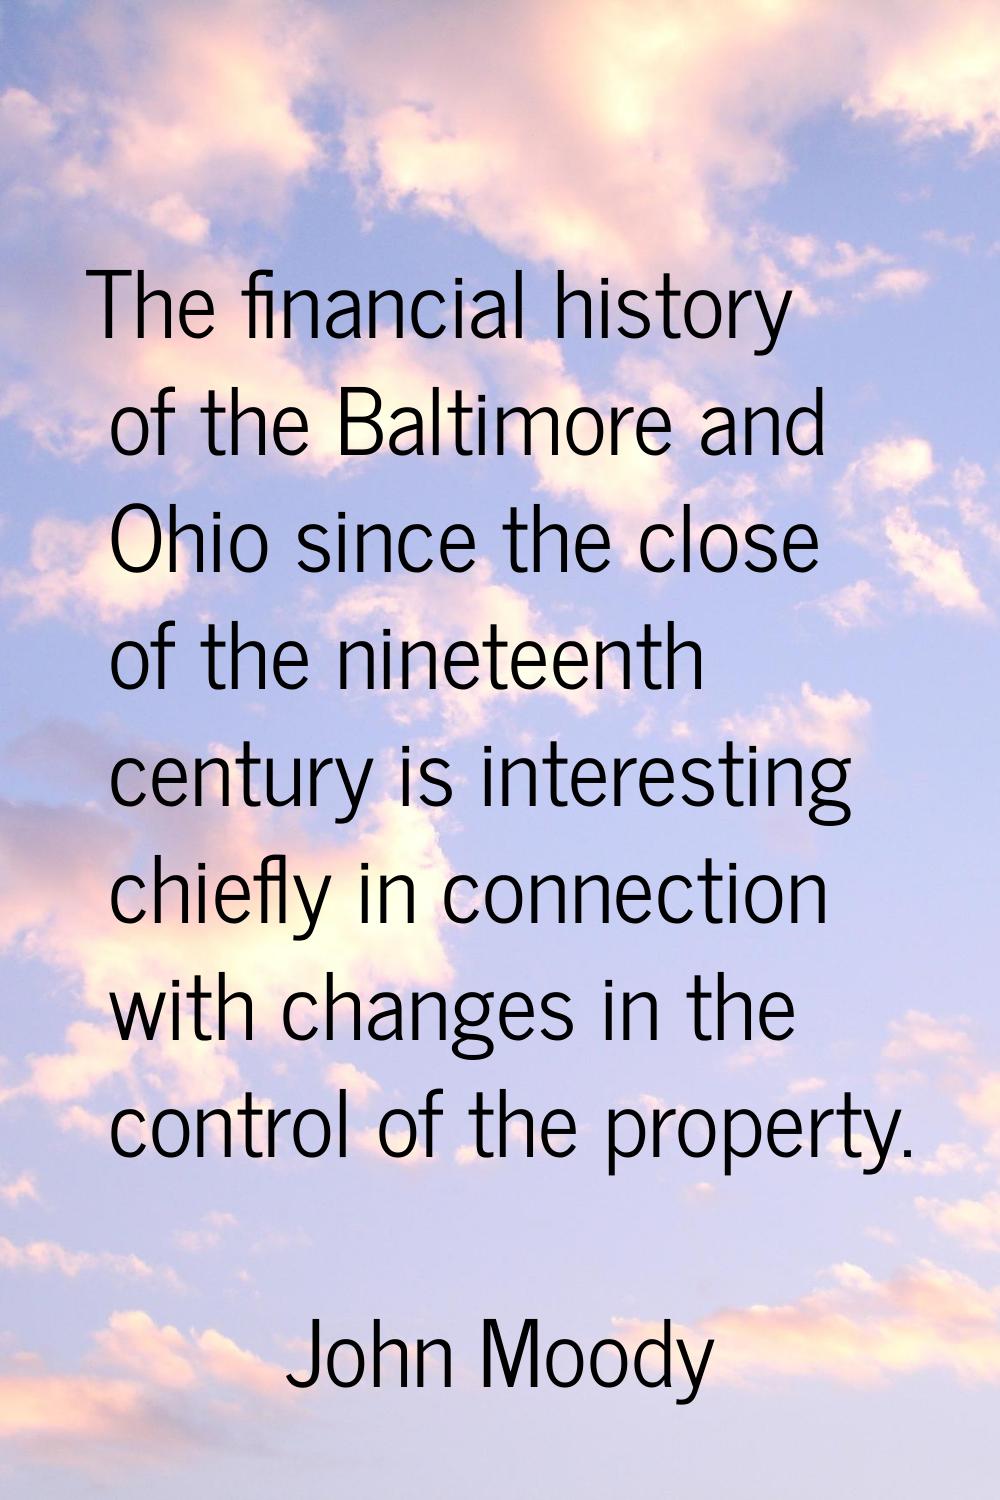 The financial history of the Baltimore and Ohio since the close of the nineteenth century is intere